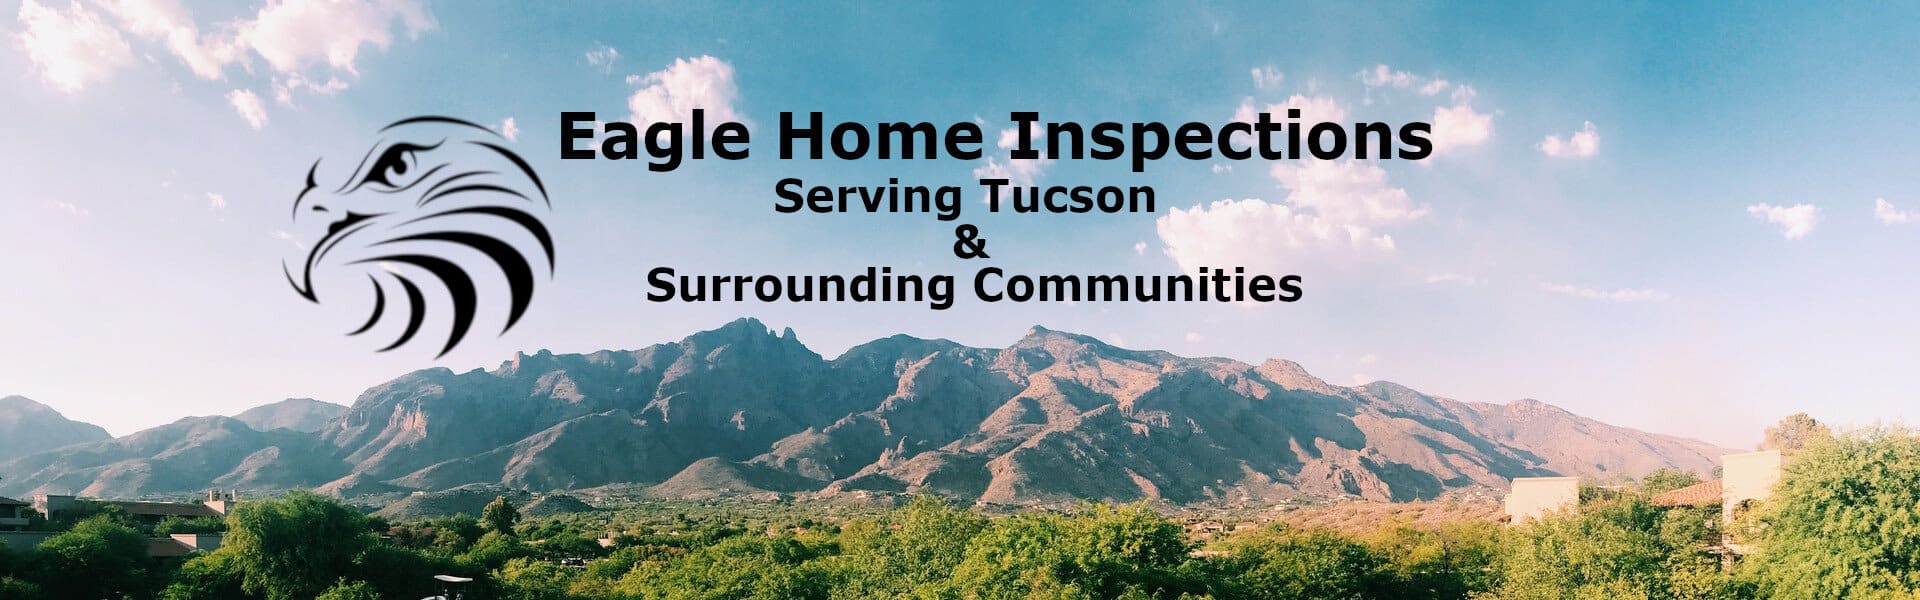 Eagle Home Inspections Home